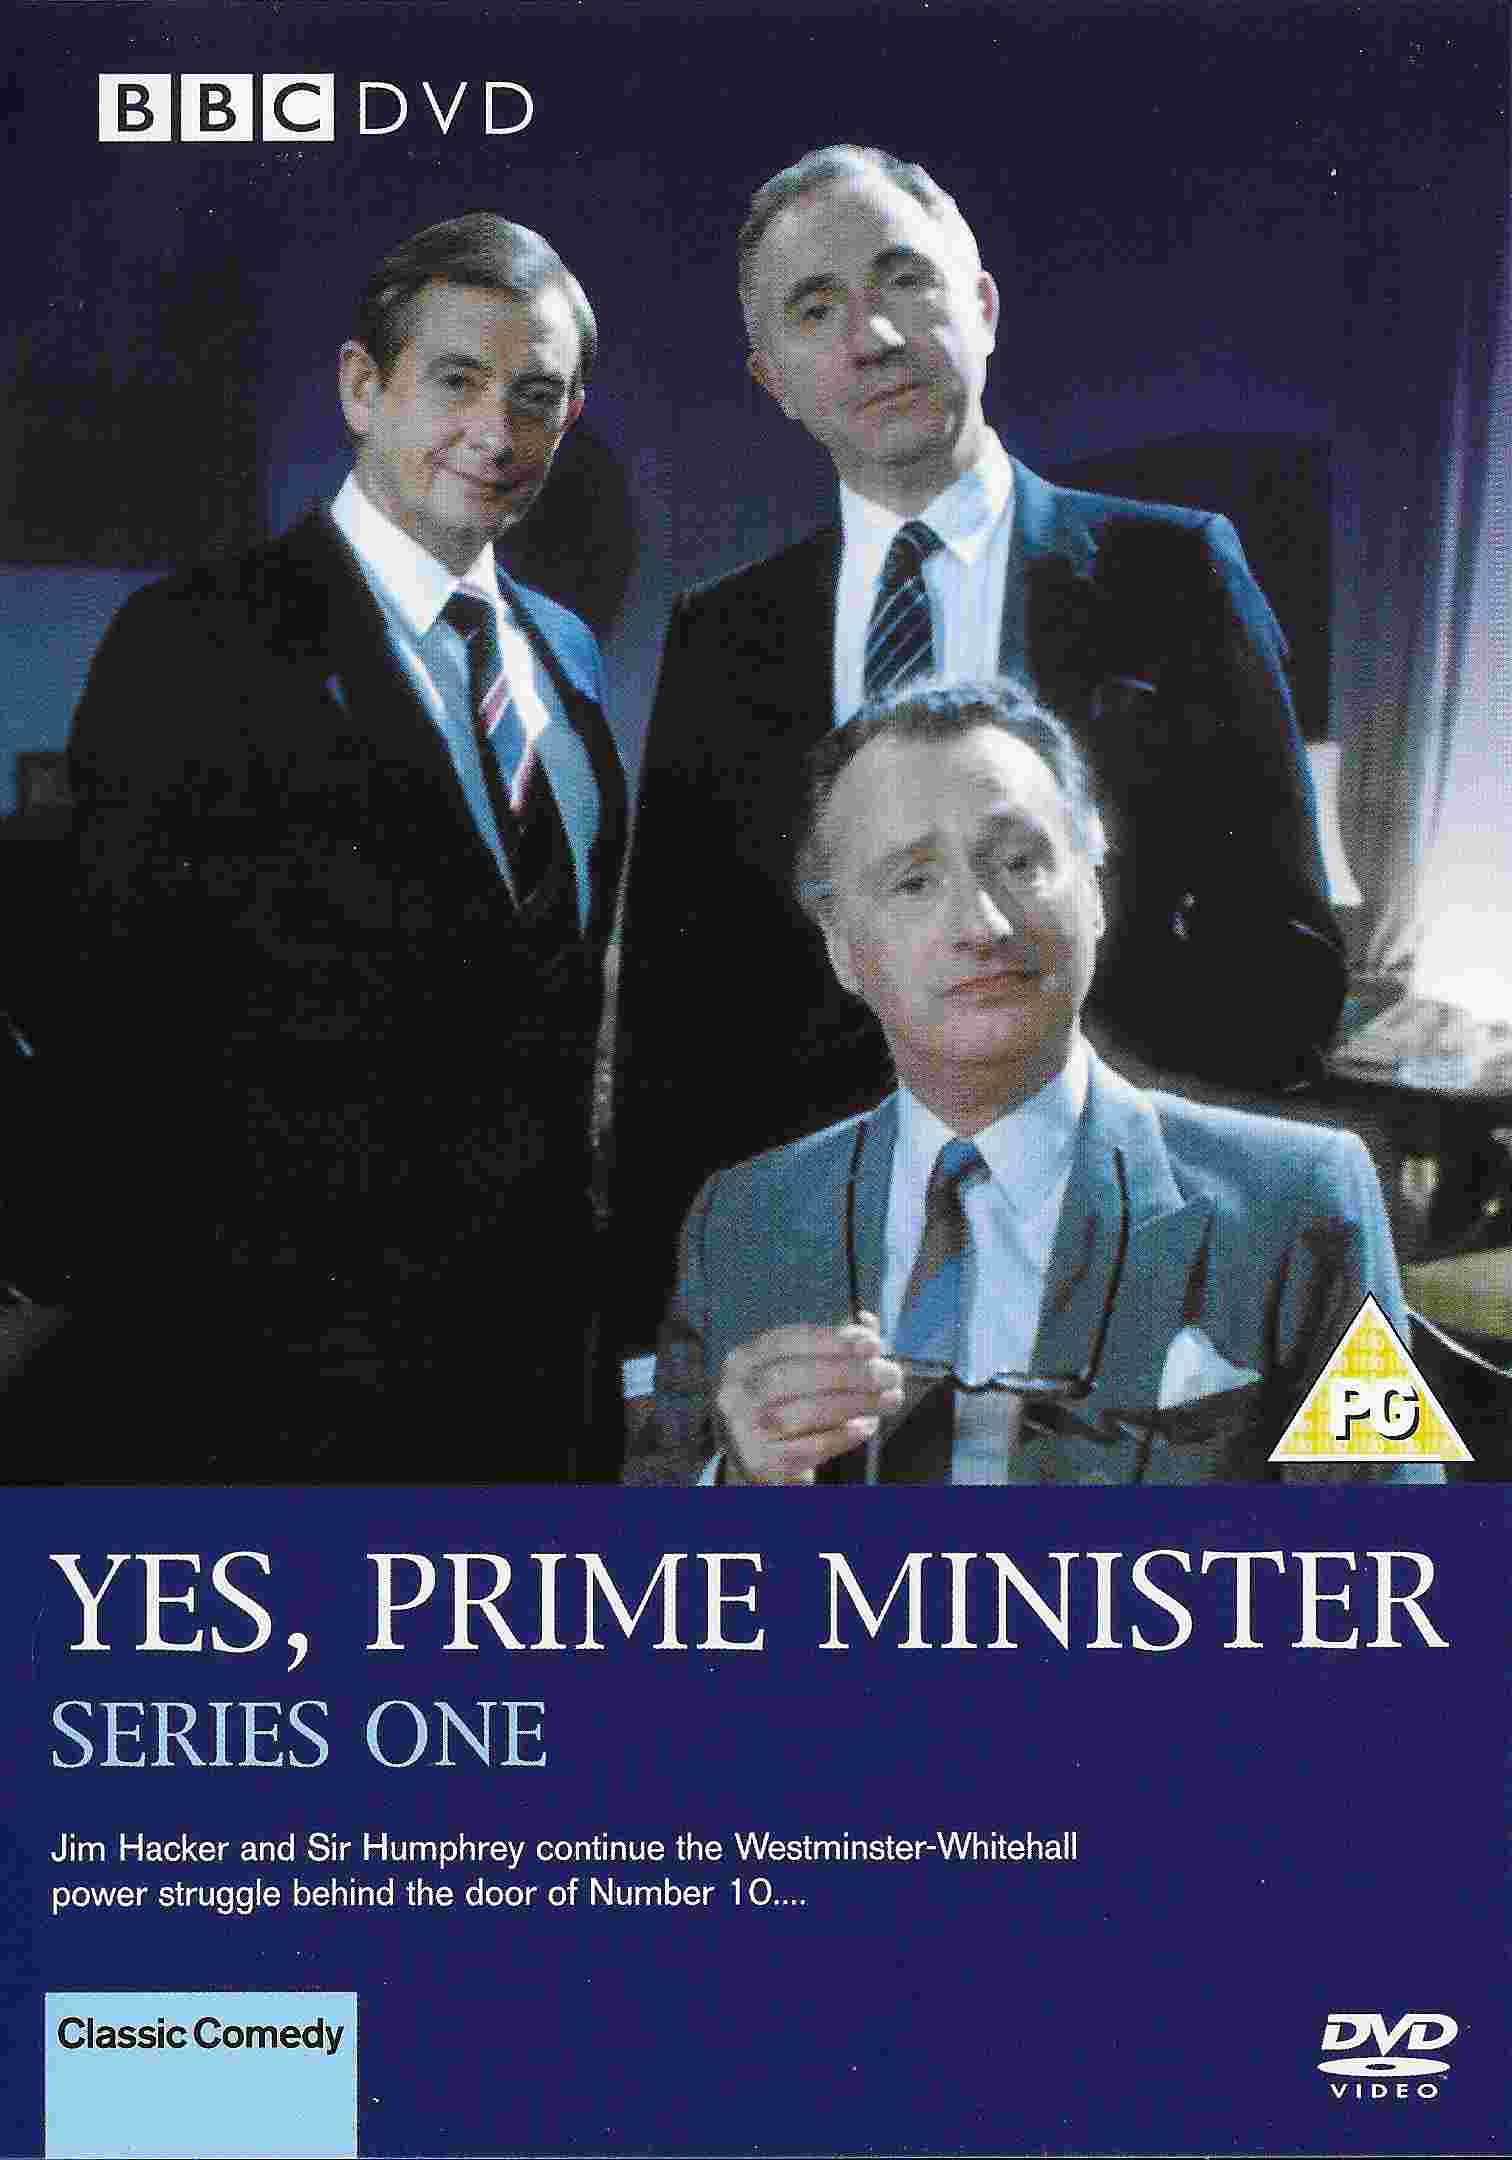 Picture of BBCDVD 1365 Yes, Prime Minister - Series One by artist Antony Jay / Jonathan Lynn